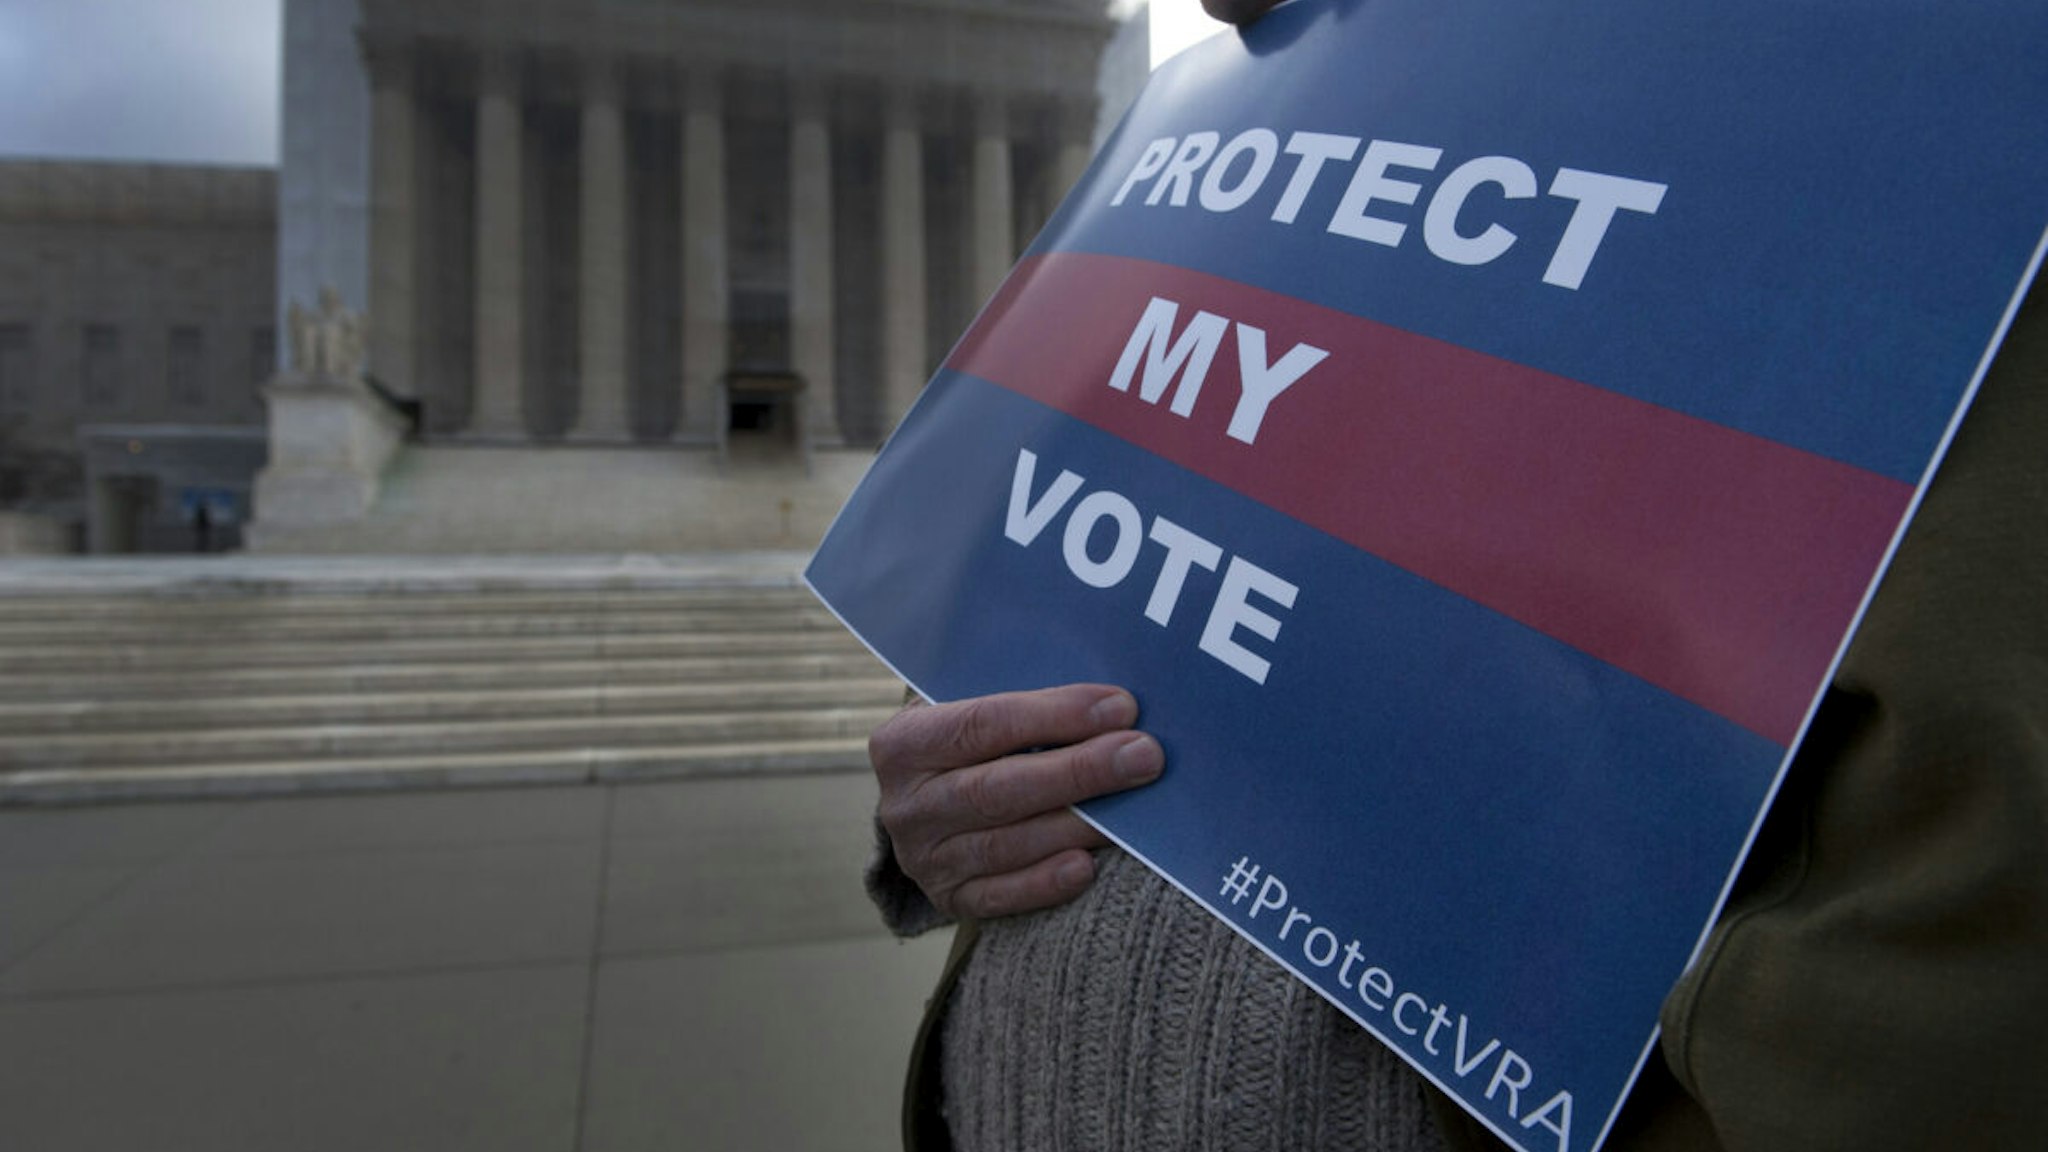 UNITED STATES - FEB 27 : Protesters hold signs outside the Supreme Court as the Shelby County, Alabama v. Holder oral arguments where set to begin at the Supreme Court on the importance of protecting the right to vote for all Americans on February 27, 2013.